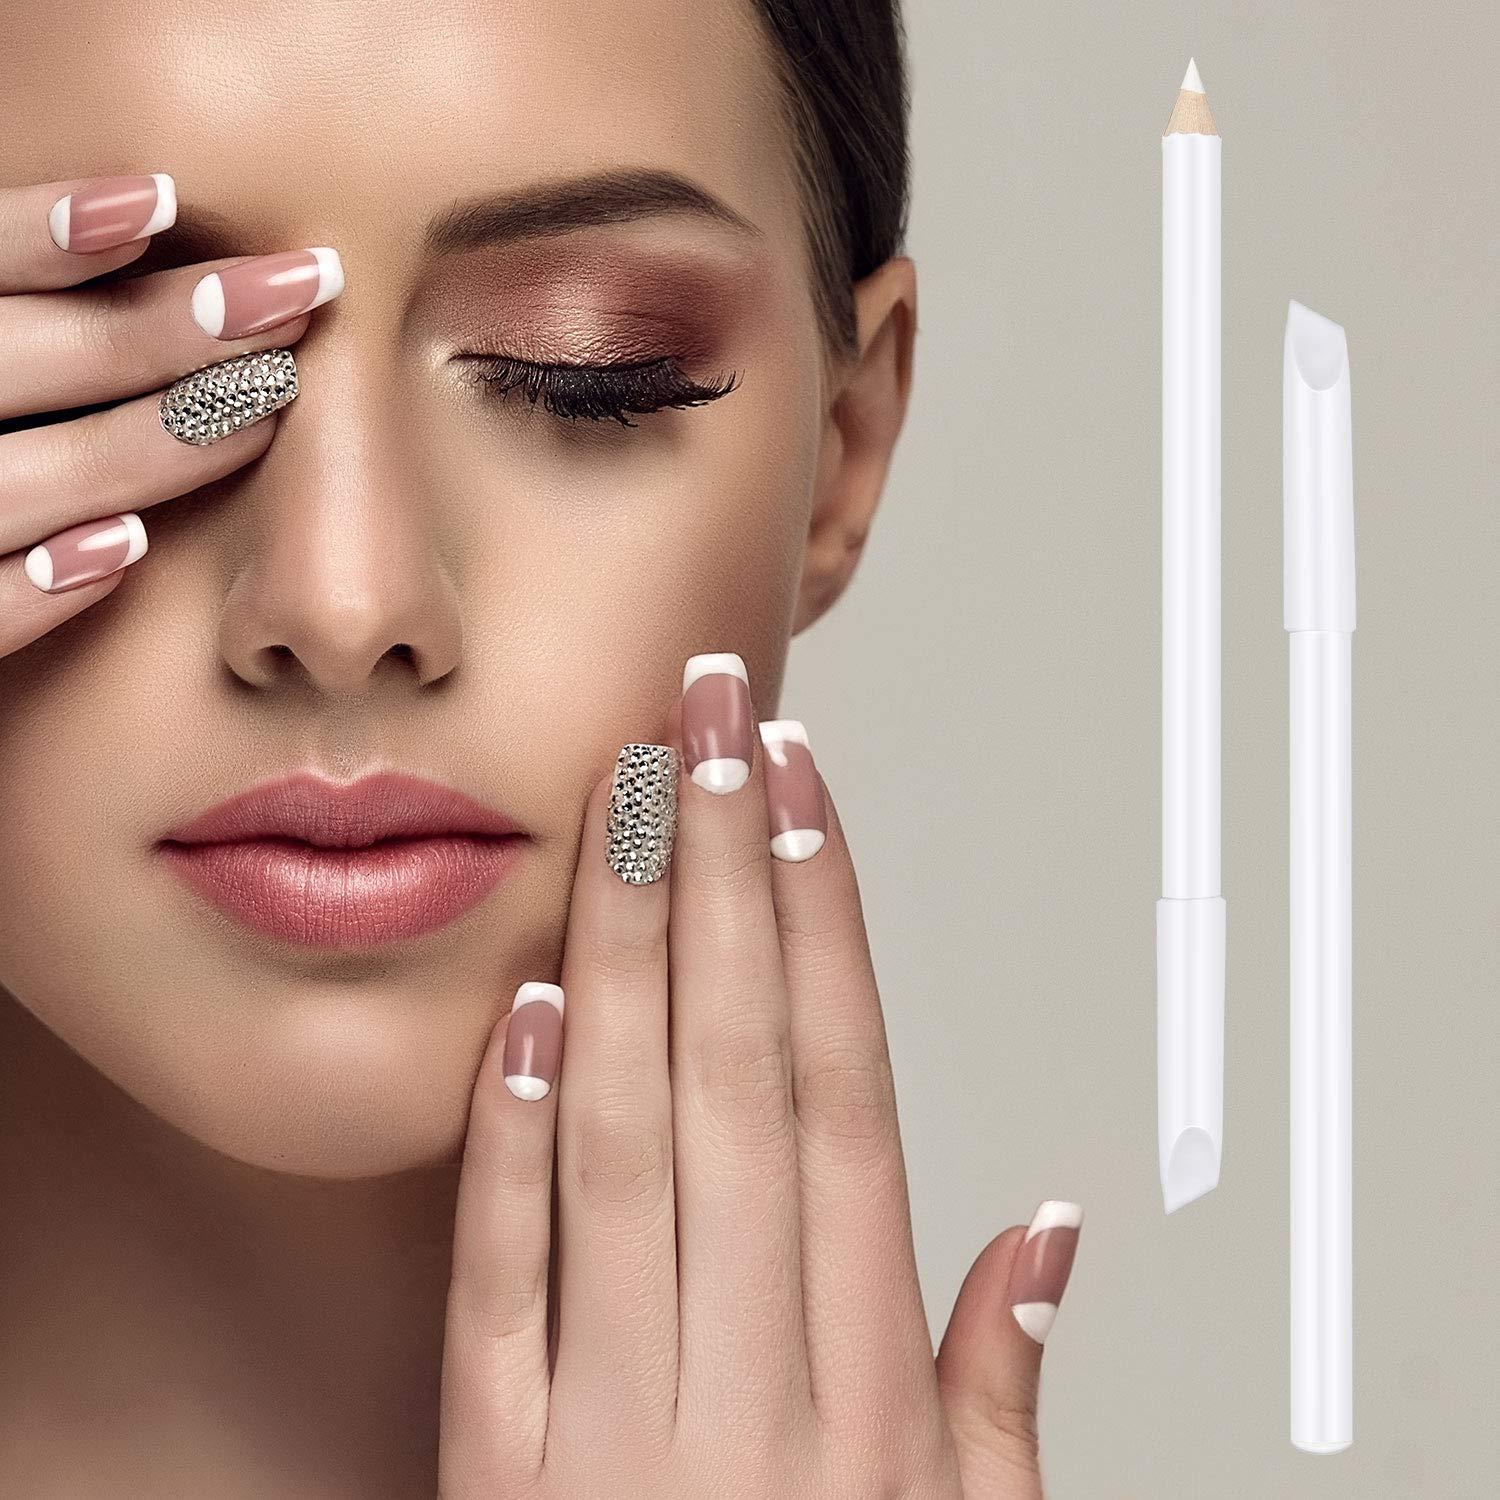  10 Pieces White Nail Pencils 2-In-1 Nail Whitening Pencils  French Manicure Pen with Cuticle Pusher Cap for DIY Nail Design Manicure  Supplies : Beauty & Personal Care